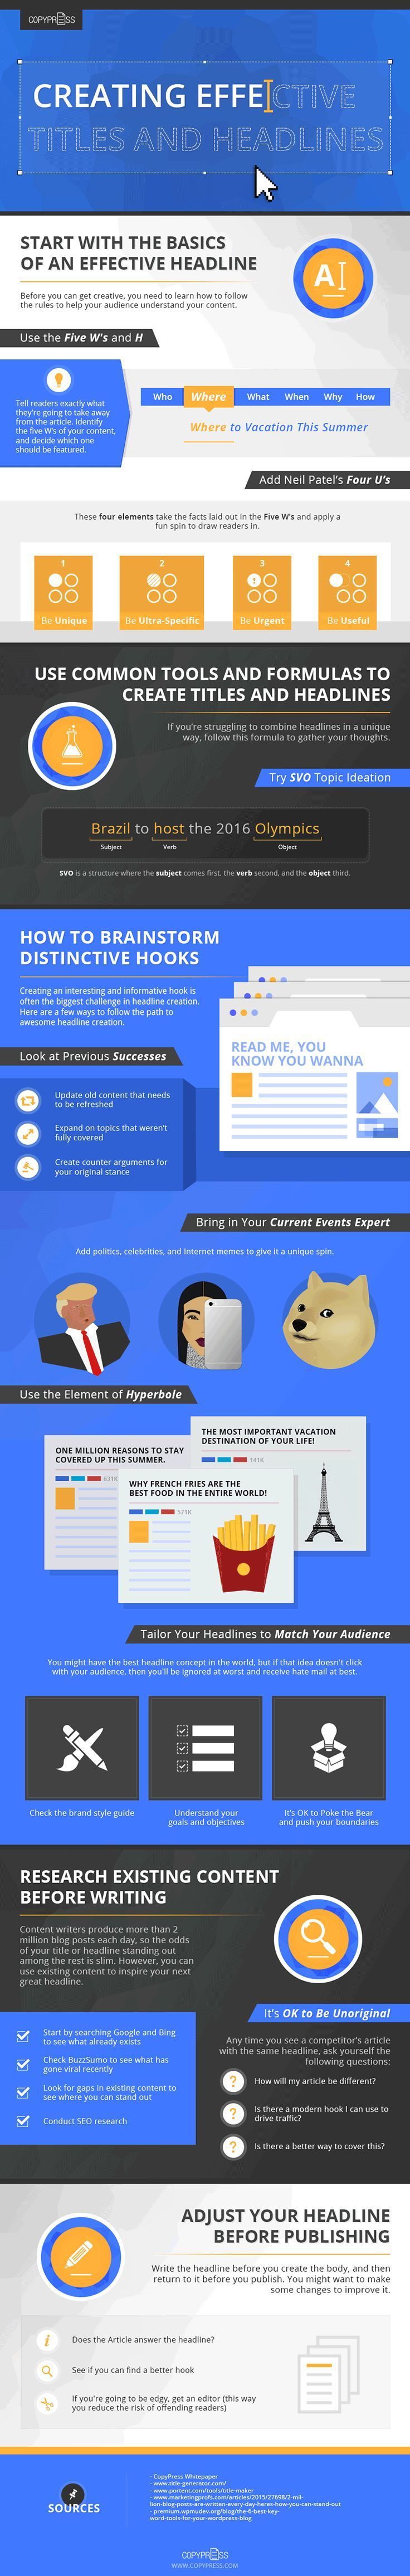 1531947223_635_Marketing-Infographic-Blogging-tips-Wondering-how-to-write-a-headline-that-gets-clicks-and-shares-Th Marketing Infographic : Blogging tips: Wondering how to write a headline that gets clicks and shares? Th...